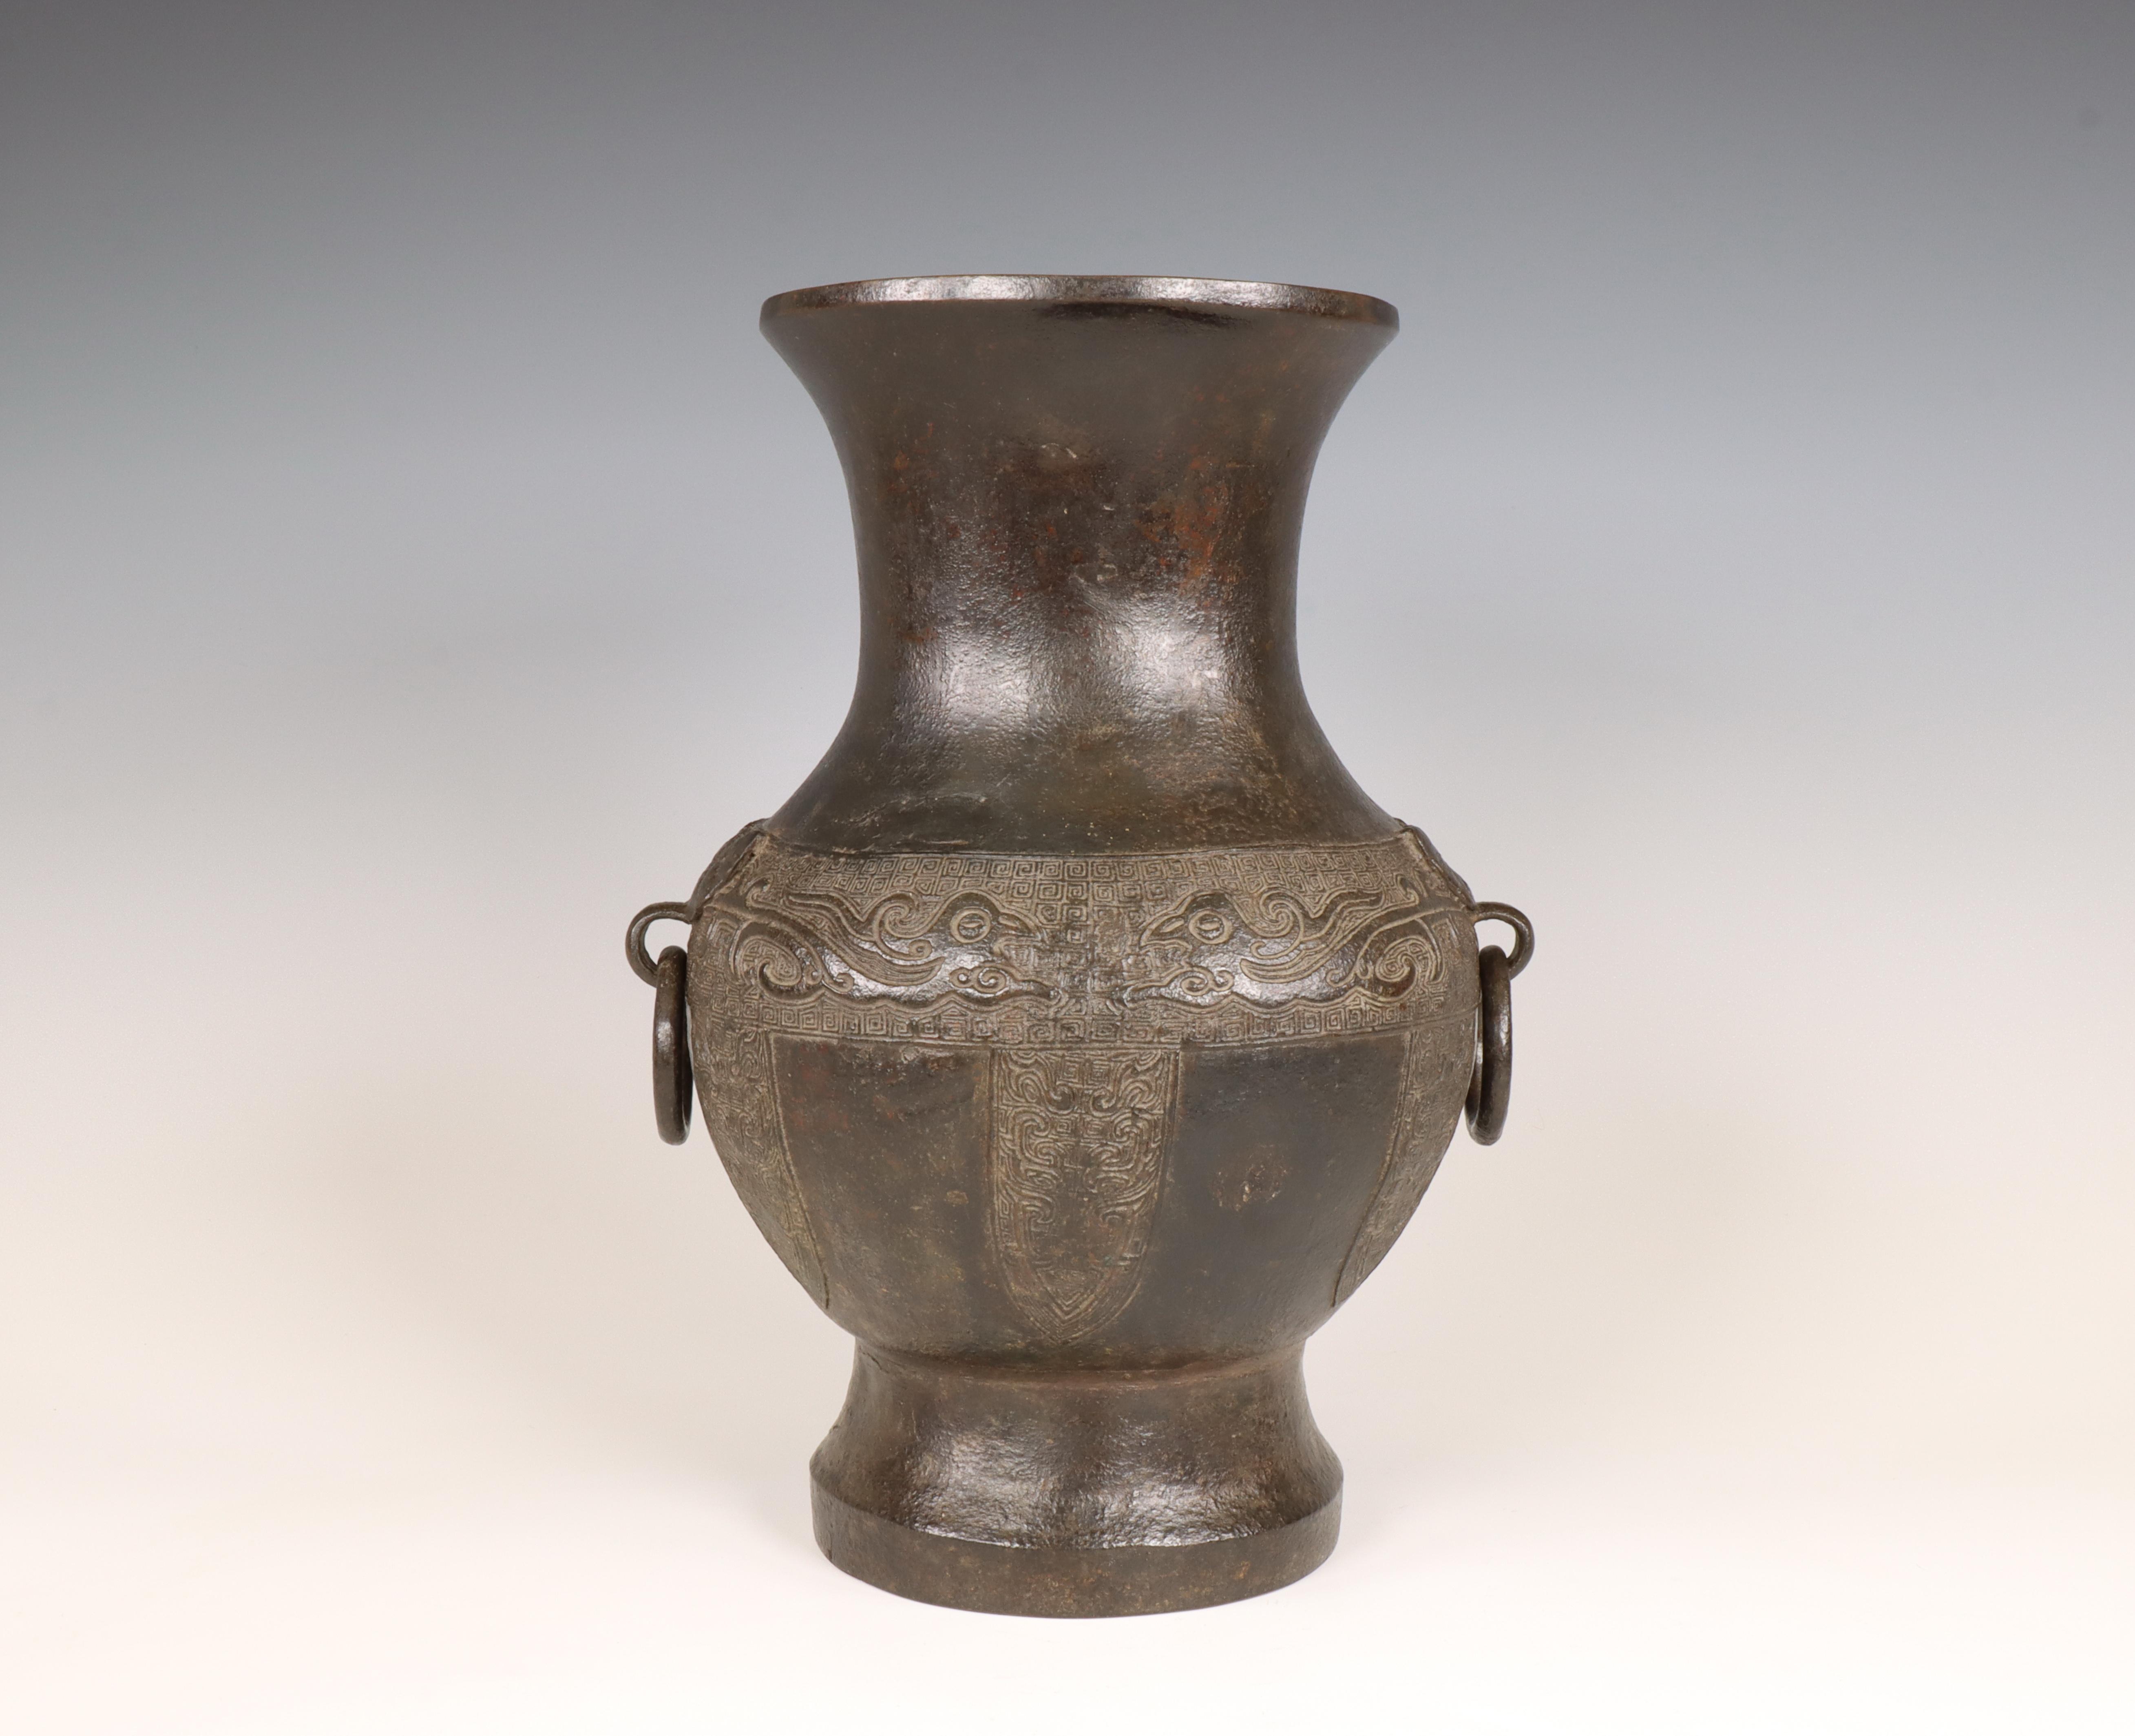 China, an archaistic bronze vase, hu, Ming dynasty, 17th century, - Image 2 of 6